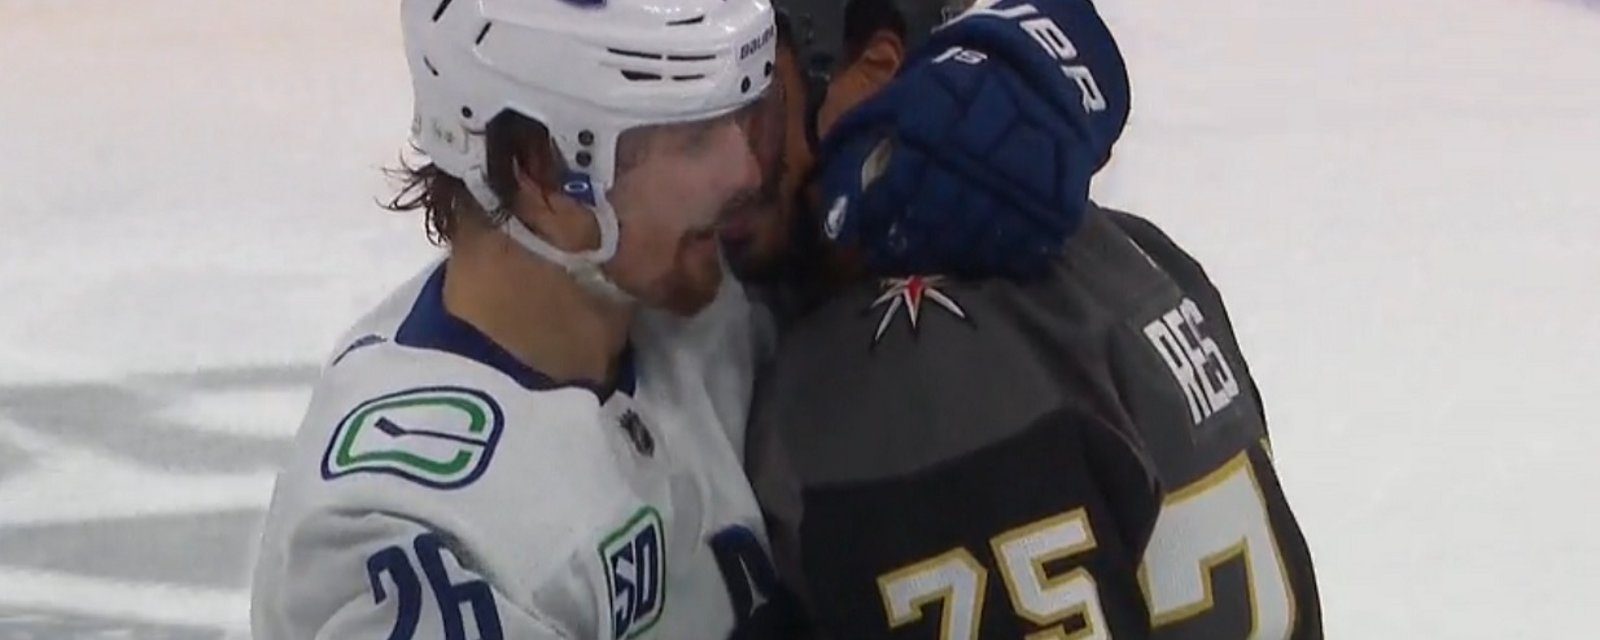 Concerns over officiating in Canucks/Golden Knights series after two controversial calls against Antoine Roussel.